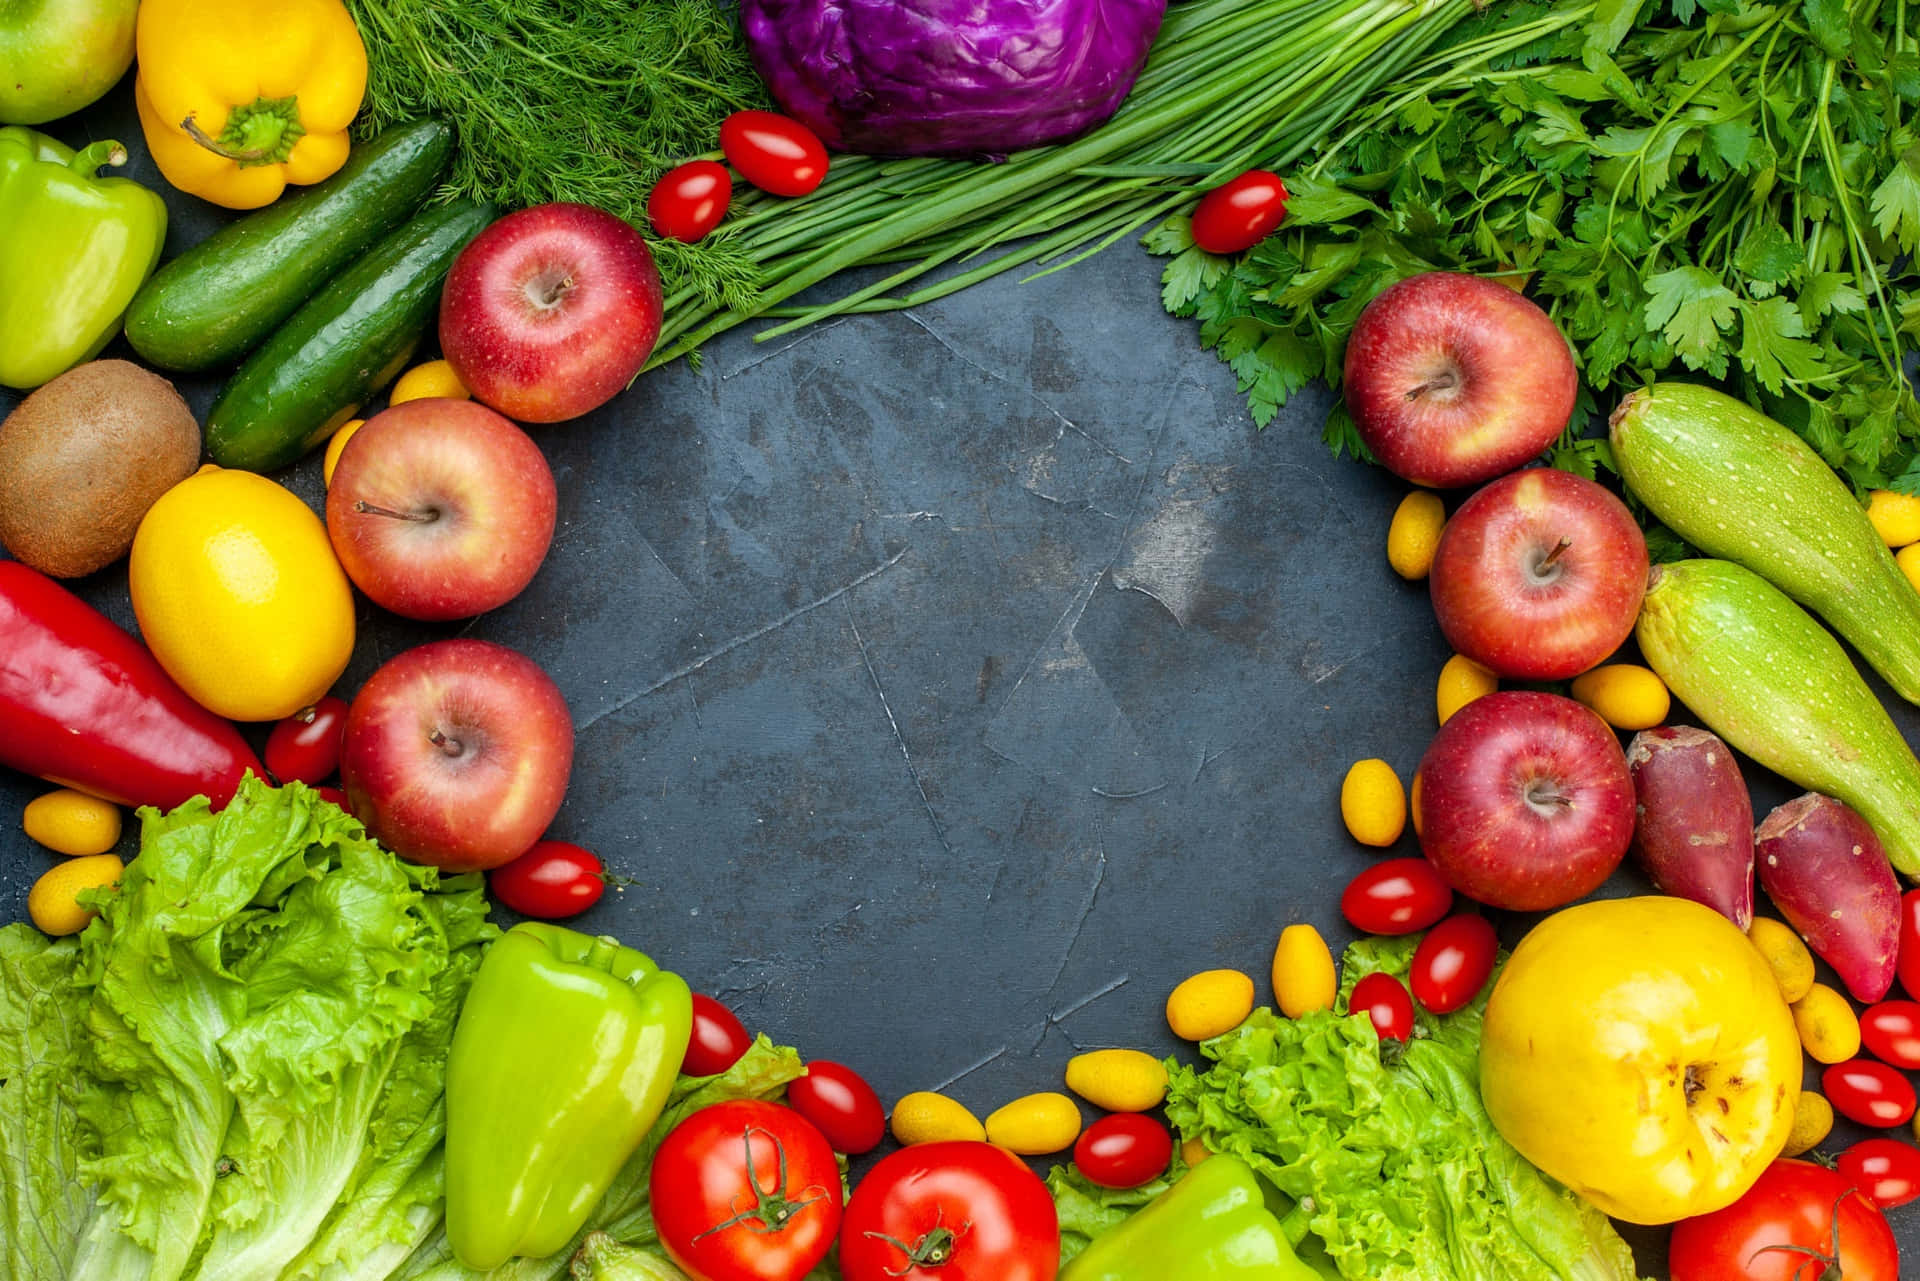 A Circle Of Vegetables Arranged In A Circle